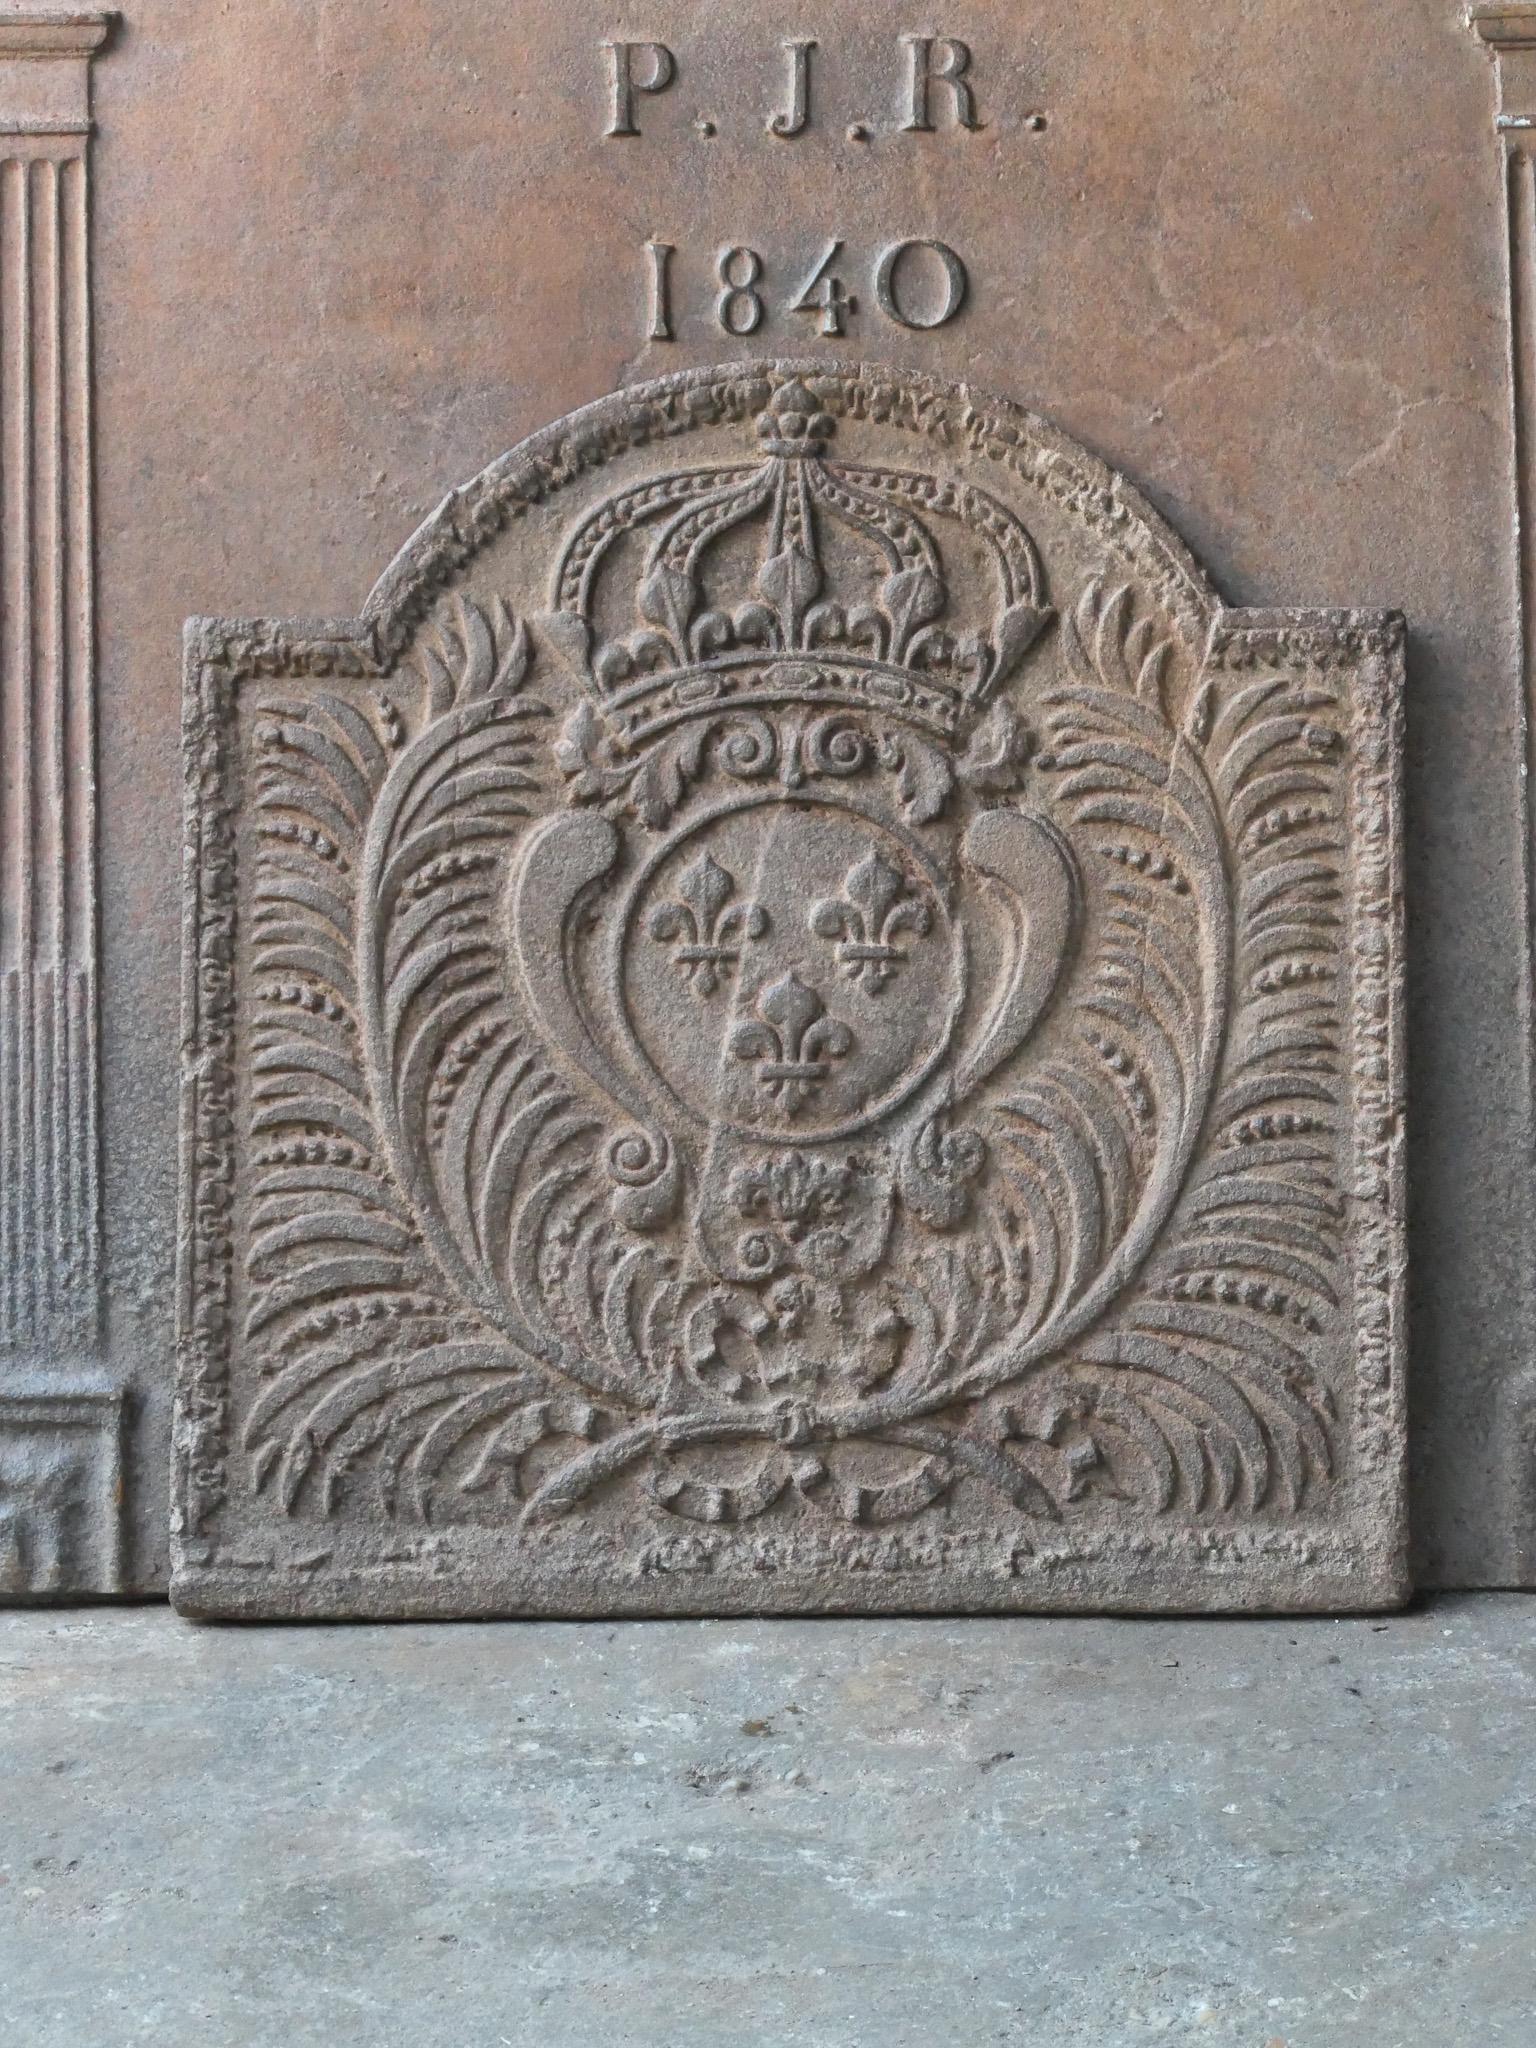 Beautiful 18th century French Louis XV fireback with the arms of France. This is the coat of arms of the House of Bourbon, an originally French royal house that became a major dynasty in Europe. It delivered kings for Spain (Navarra), France, both